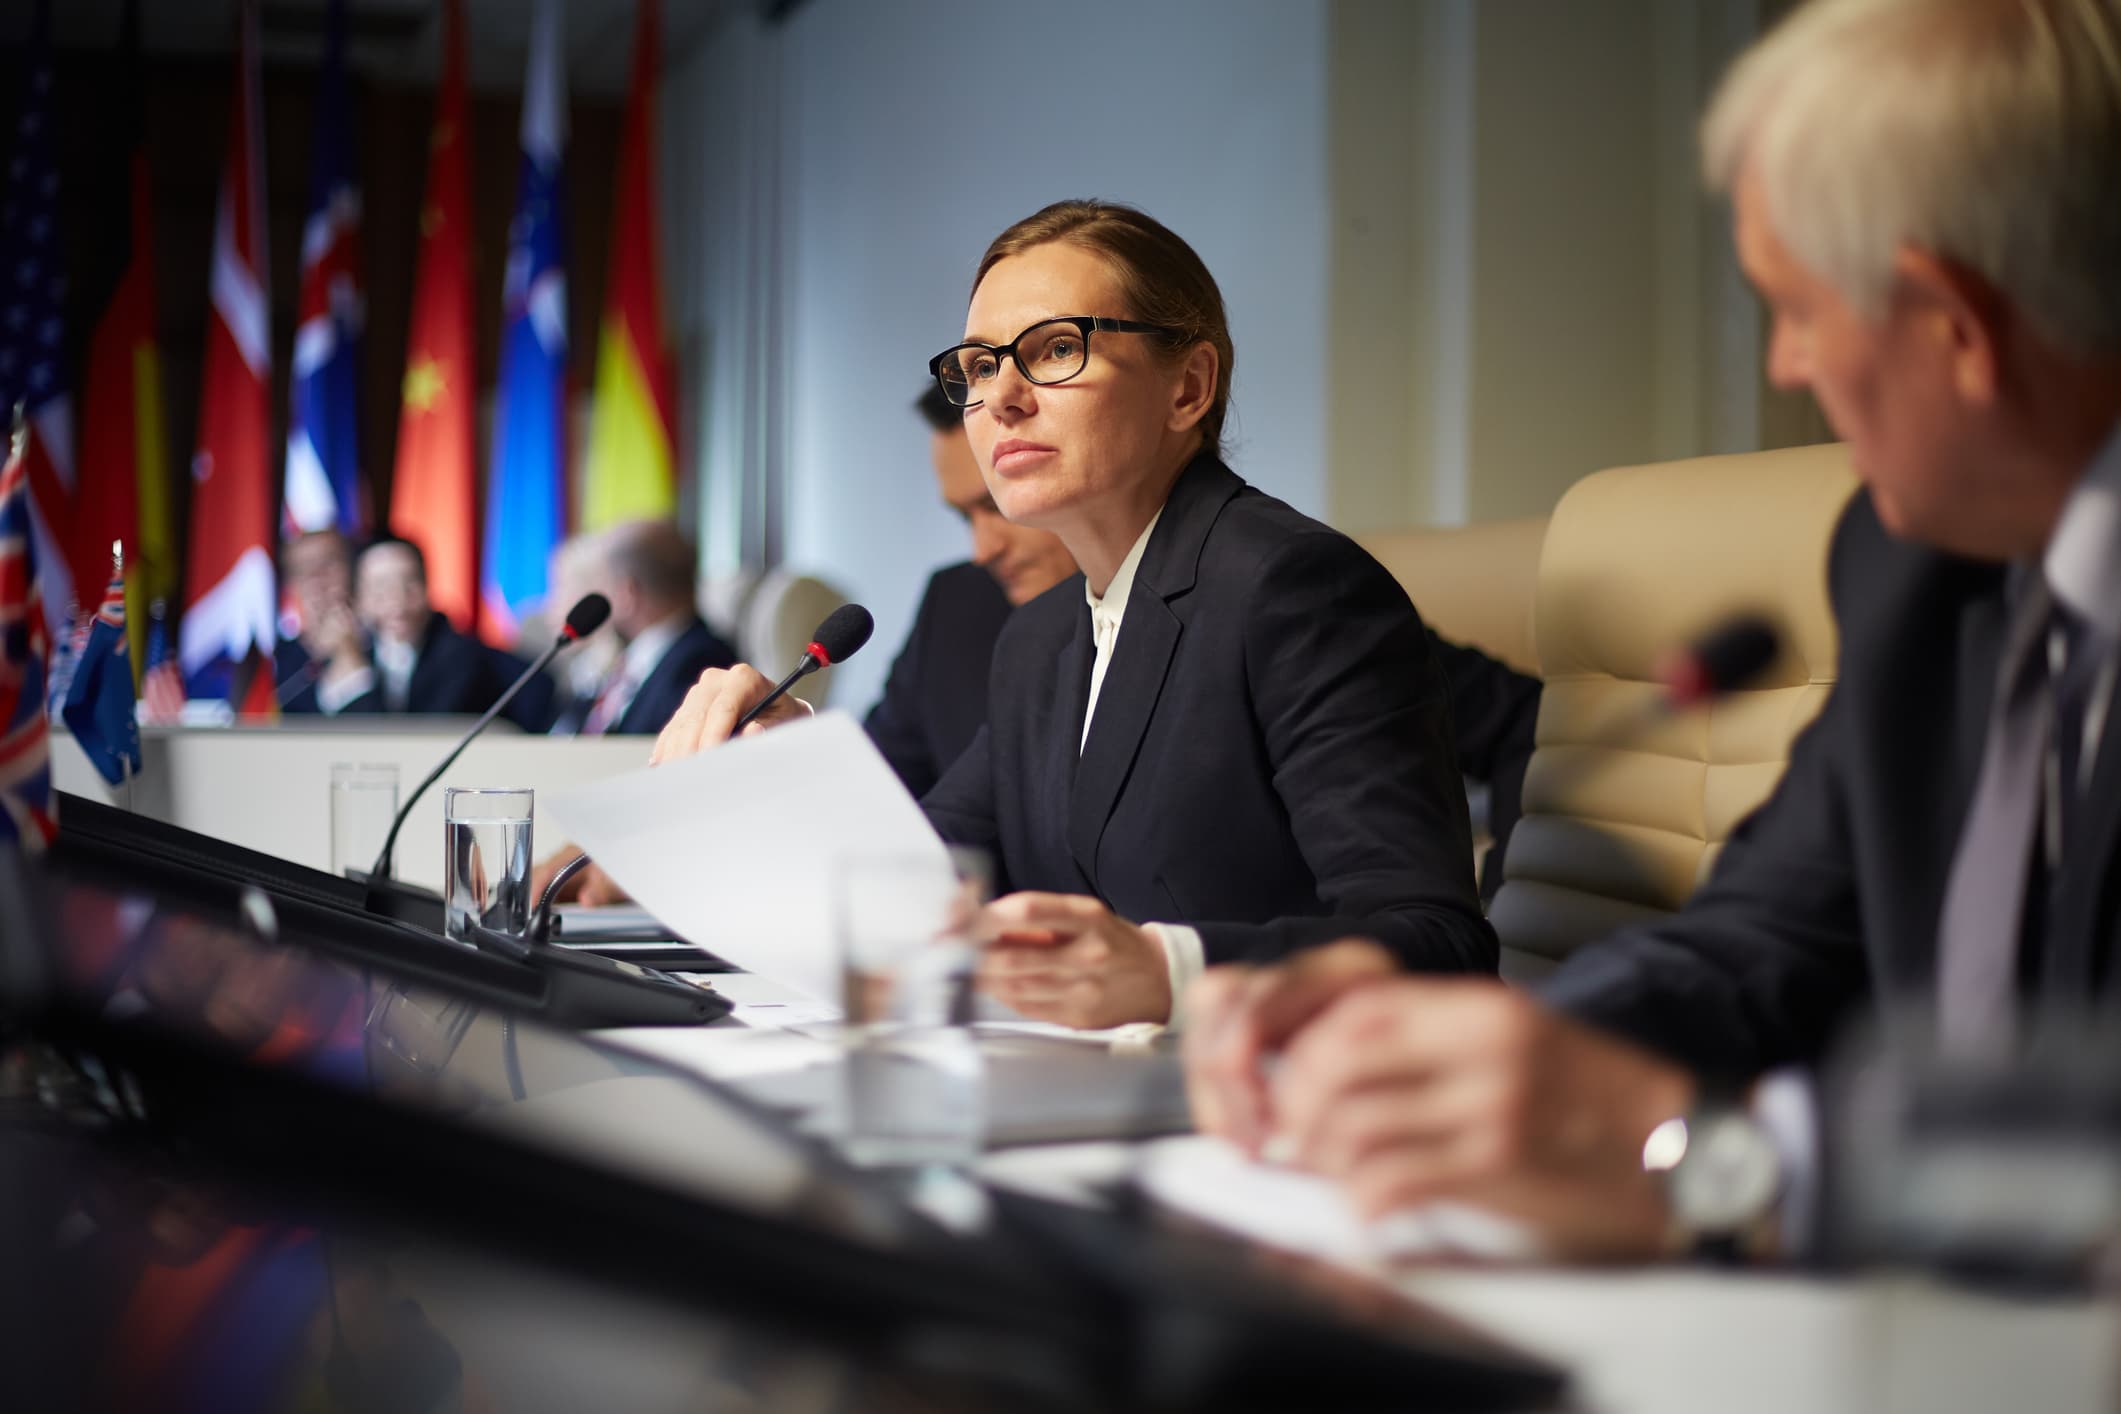 A woman in business attire wearing glasses at the table with political leaders and world flags behind them.